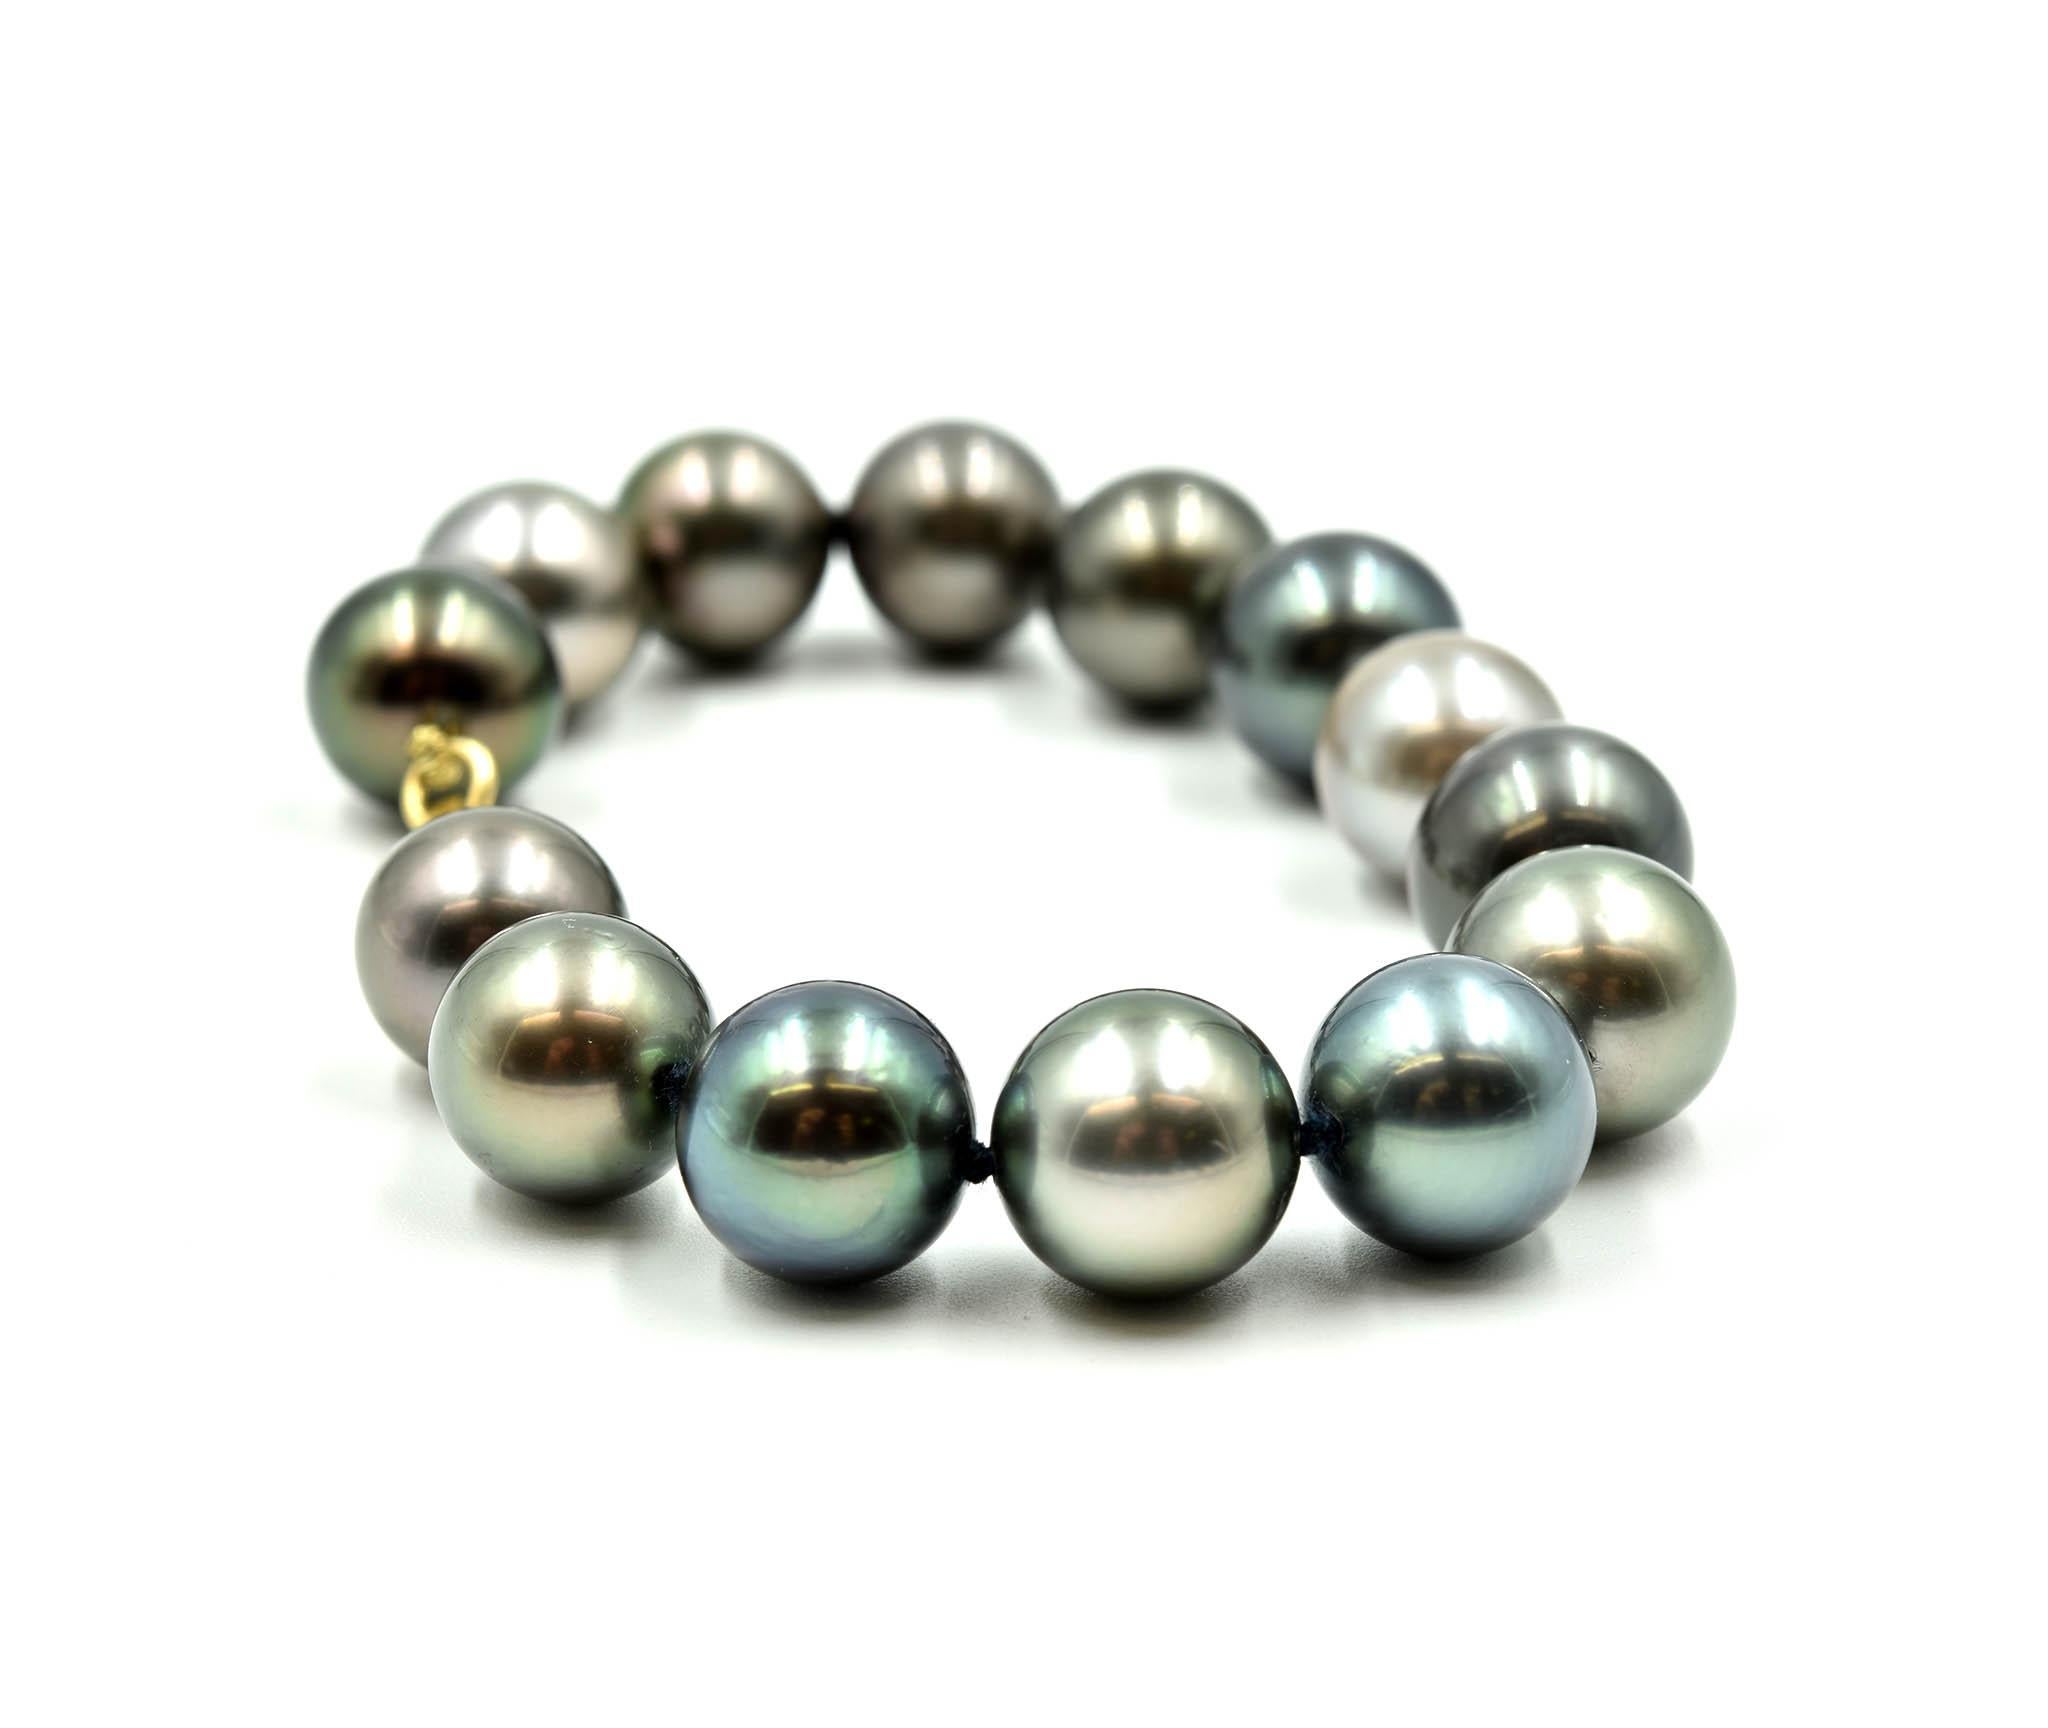 Women's South Sea Tahitian Pearl Knotted Bracelet with 14 Karat Yellow Gold Clasp